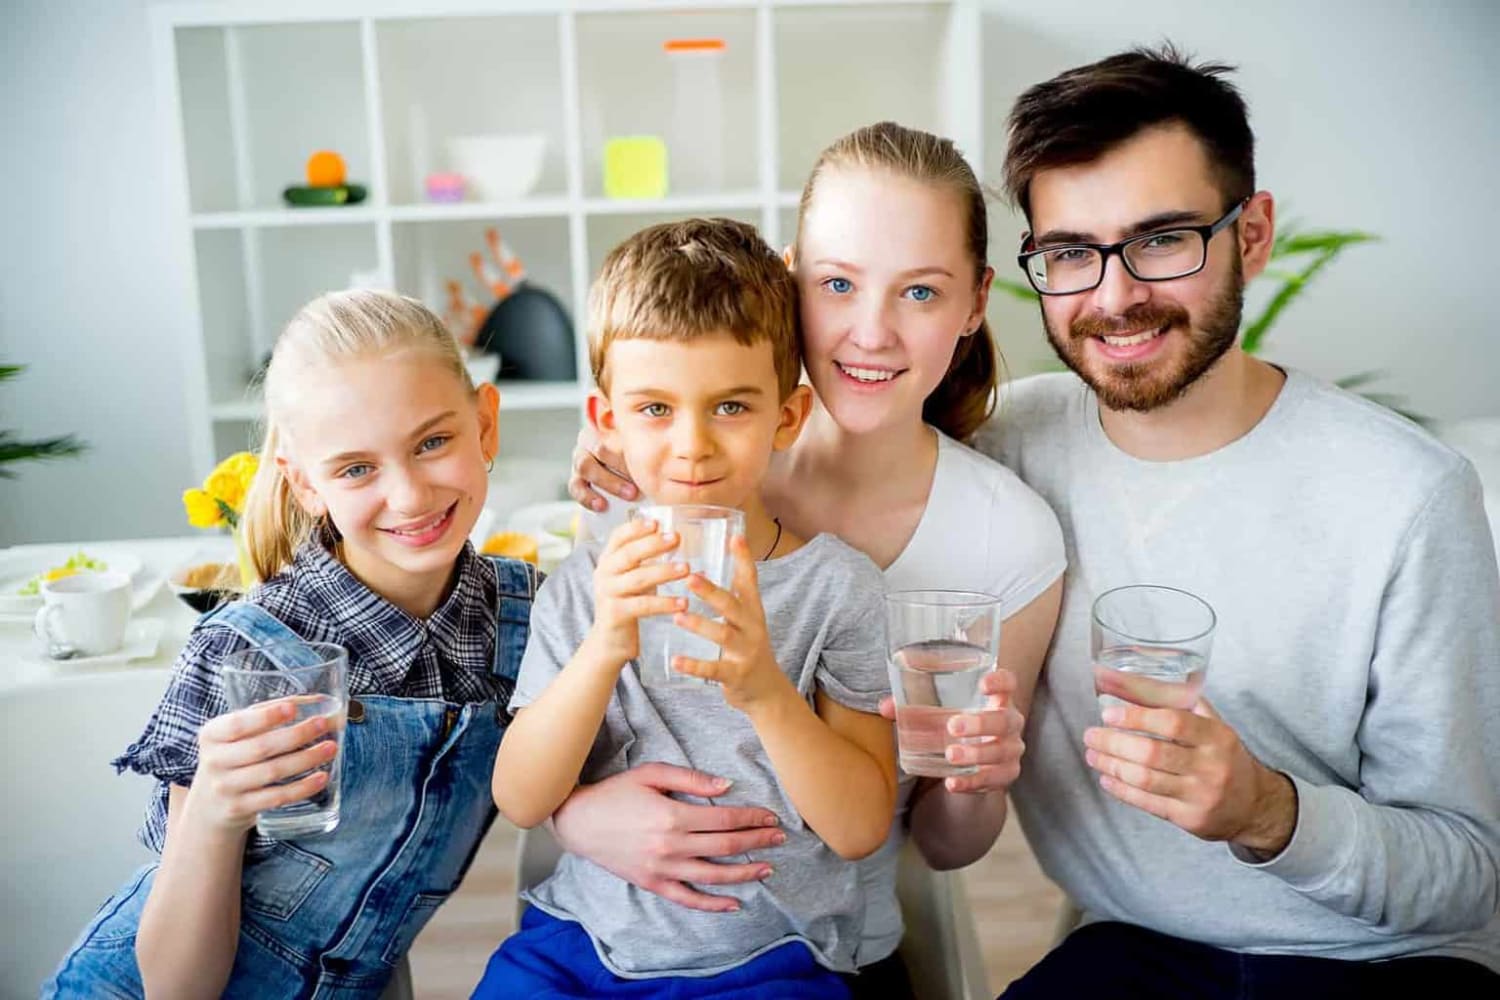 The Best Home Water Filtration System for City Water - SpringWell Water Filtration Systems